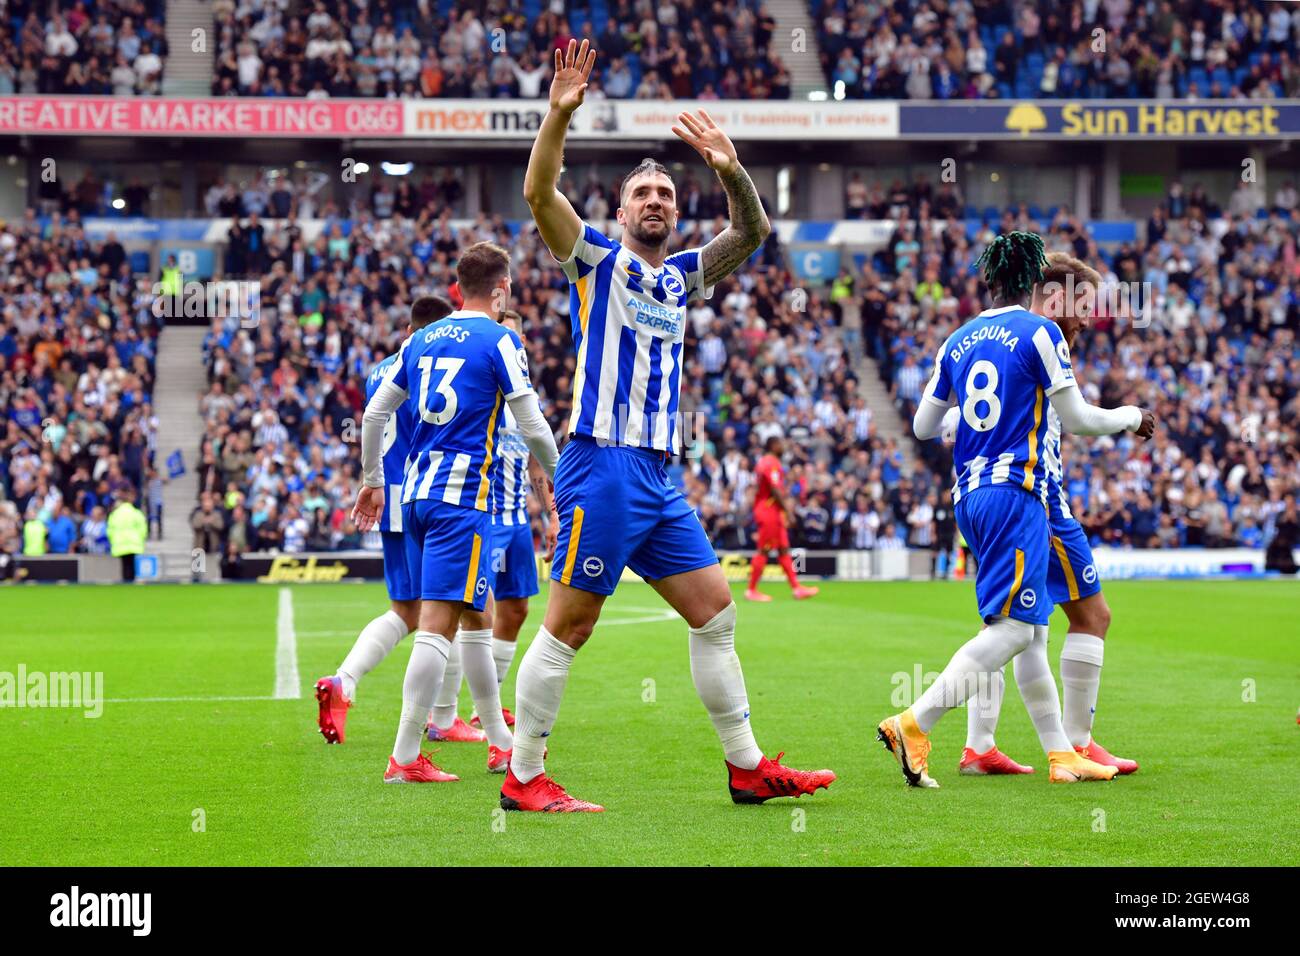 Brighton, UK. 21st Aug, 2021. Shane Duffy of Brighton and Hove Albion celebrates after scoring to make the score 1-0 during the League match between Brighton & Hove Albion and Watford